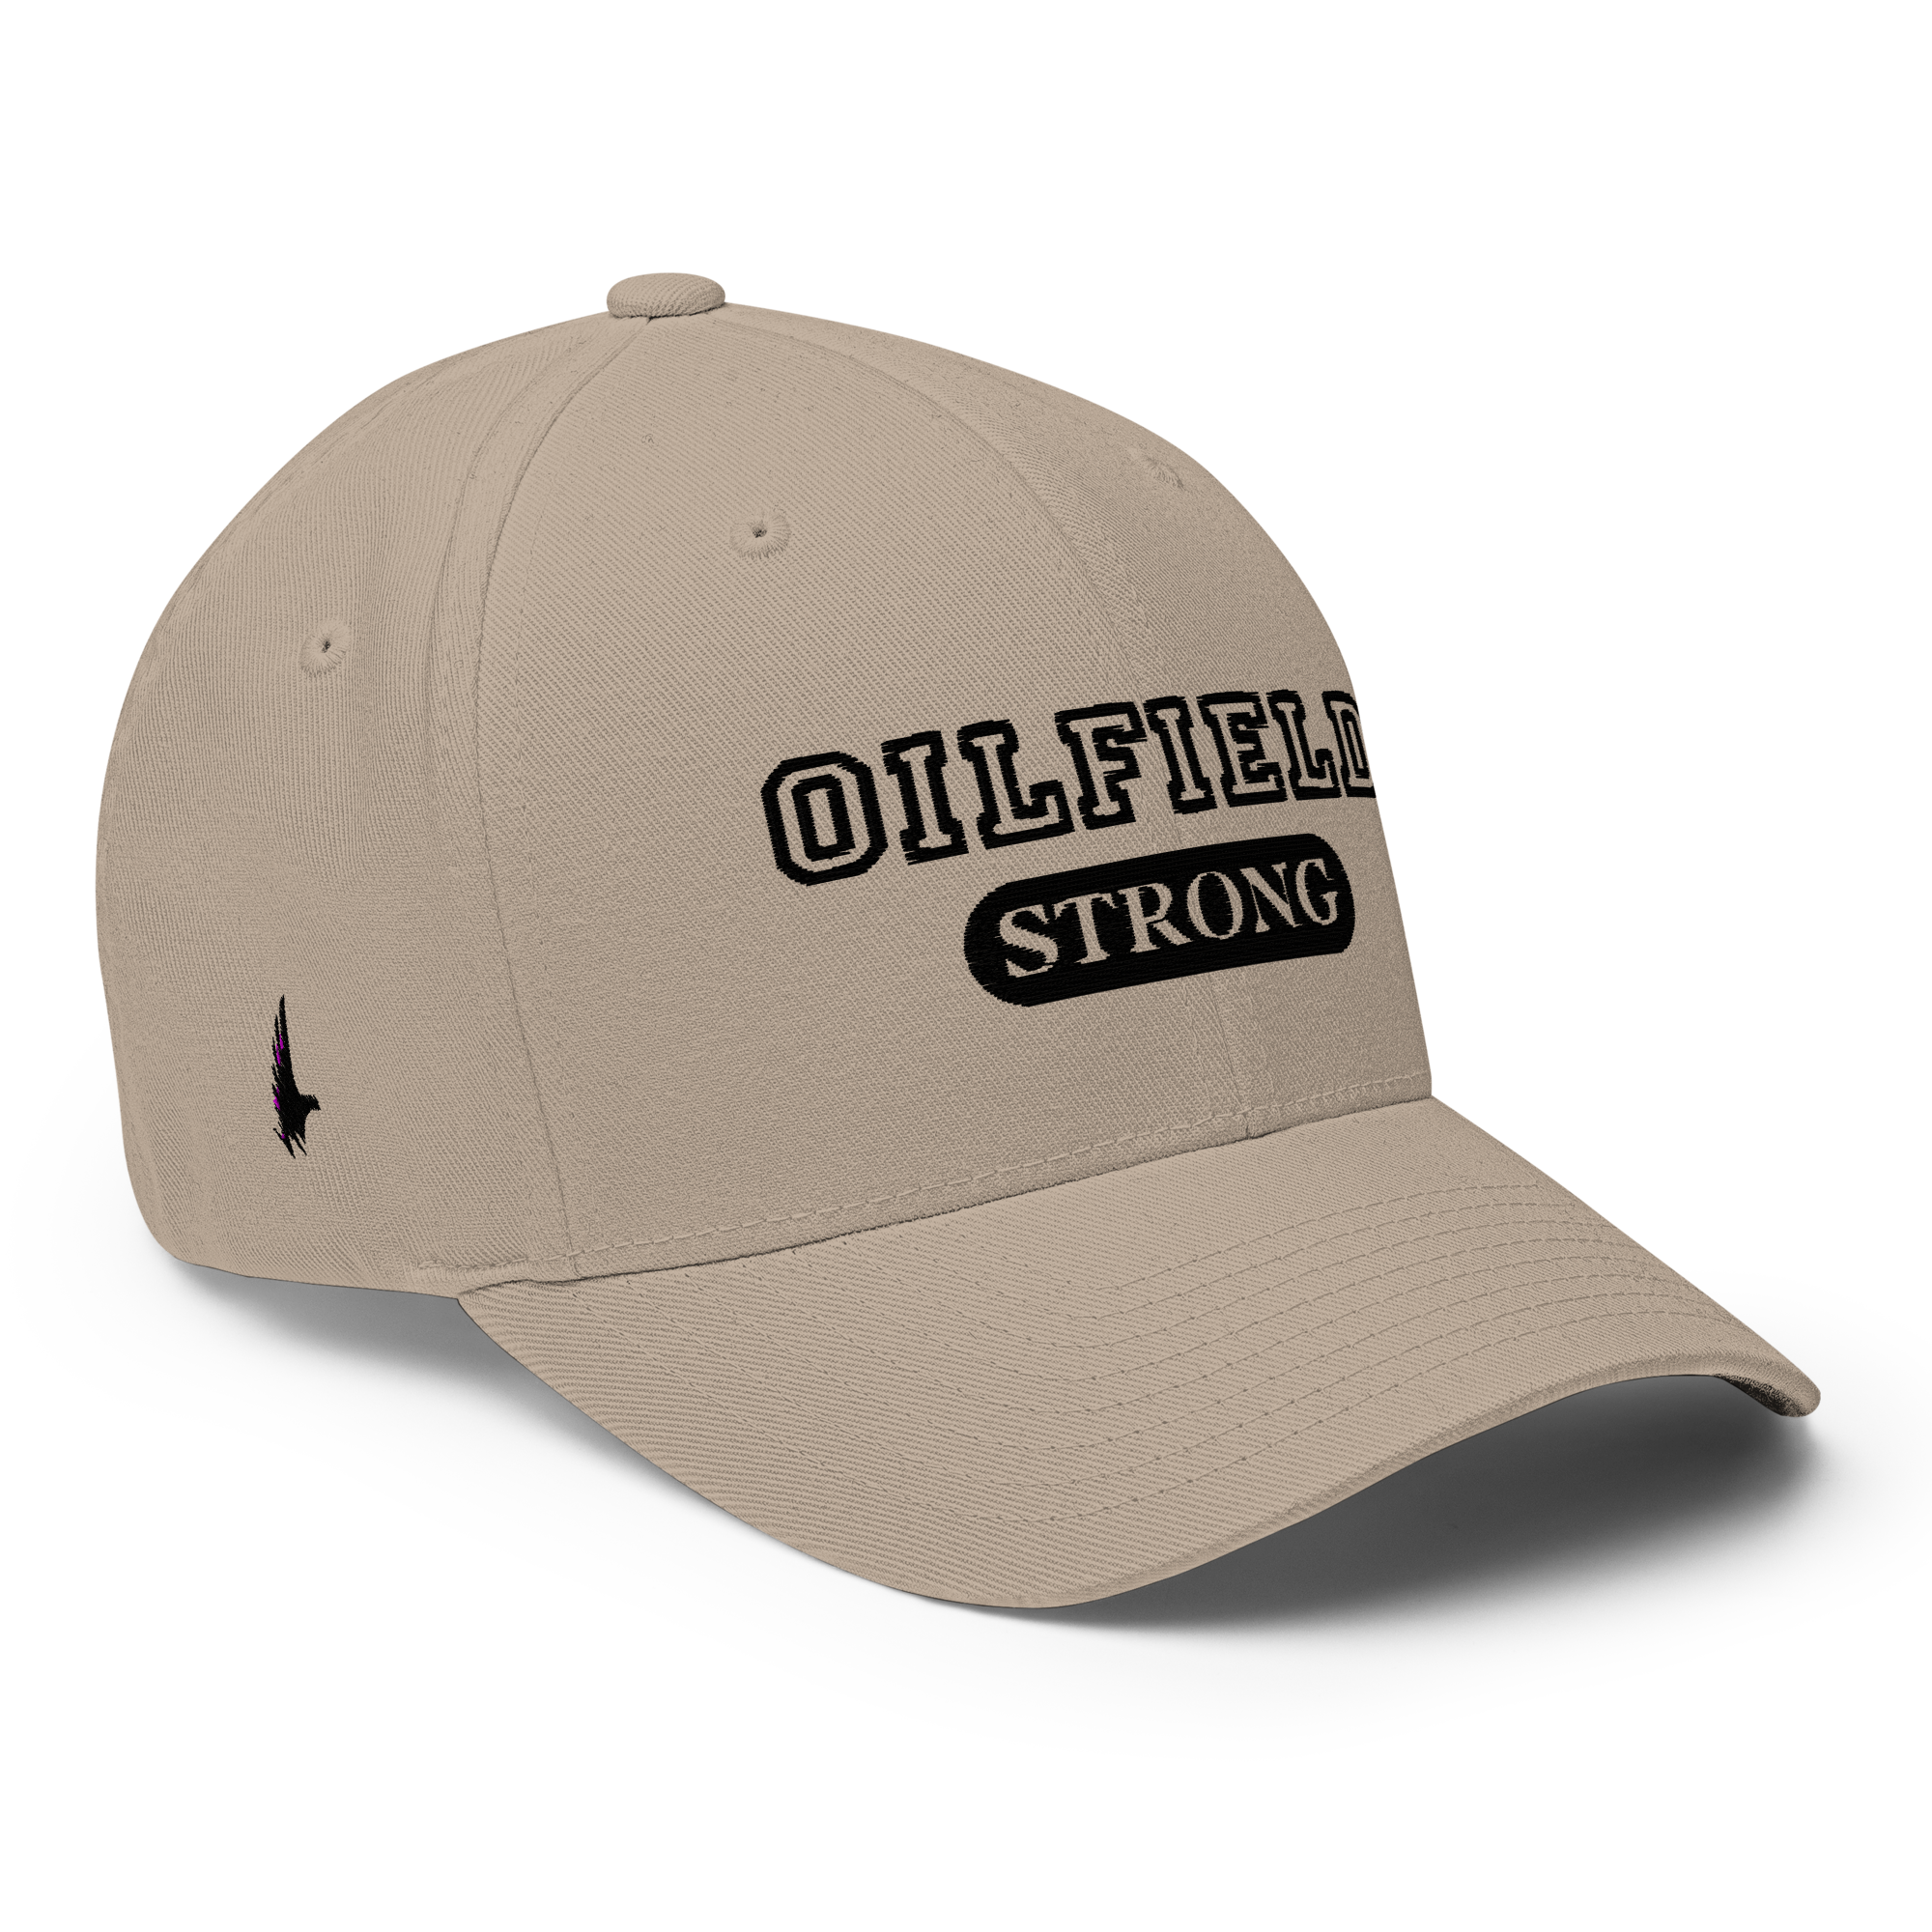 Oilfield Strong Fitted Hat Sandstone Black - Loyalty Vibes